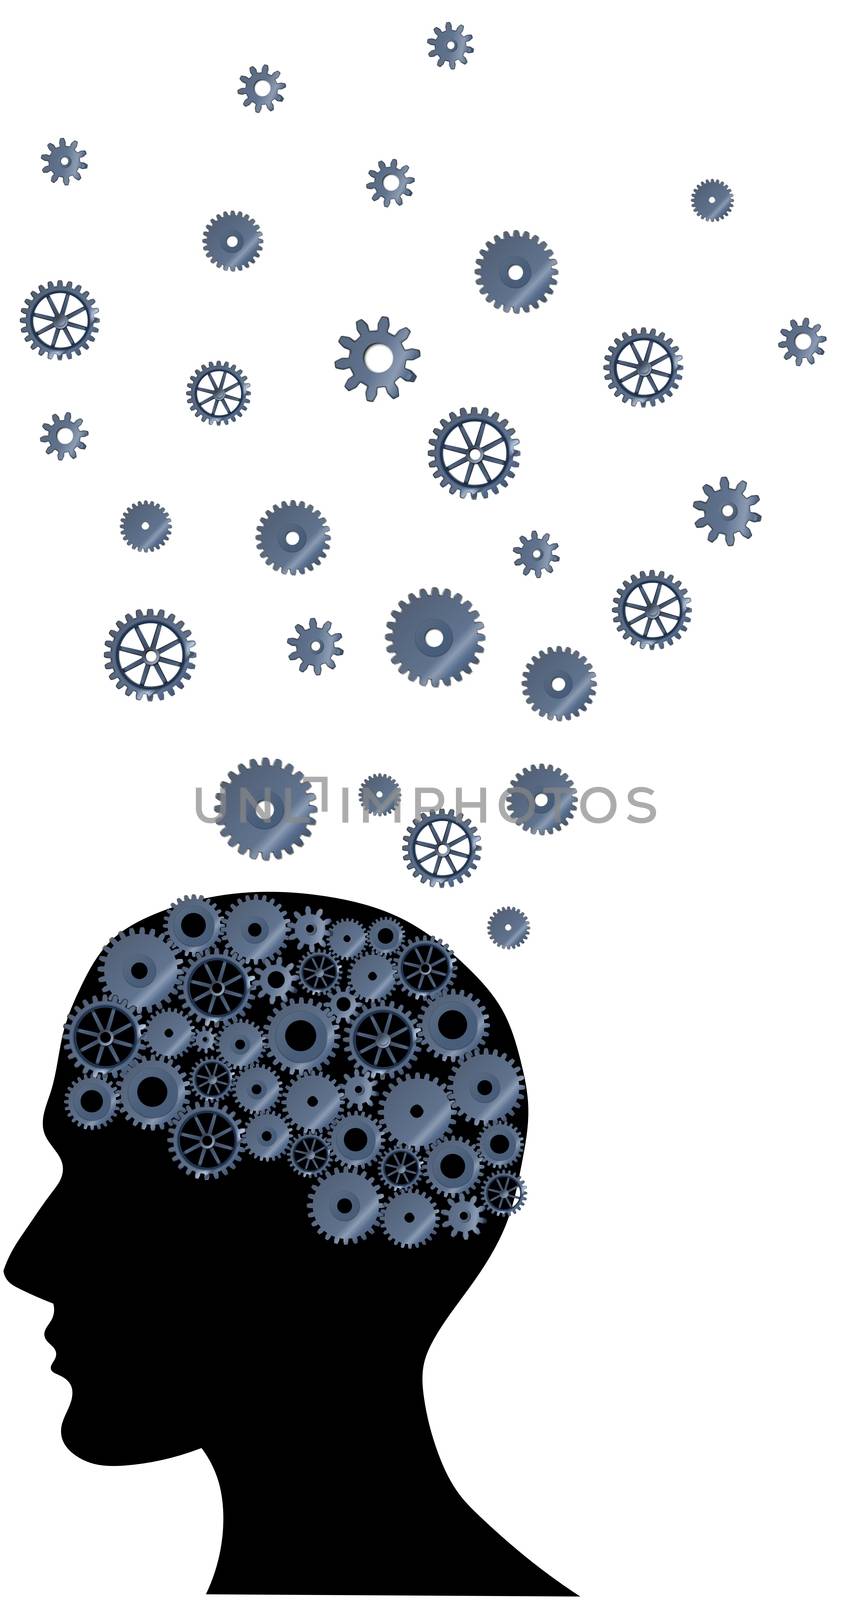 Illustration of a brain with many ideas on a white background